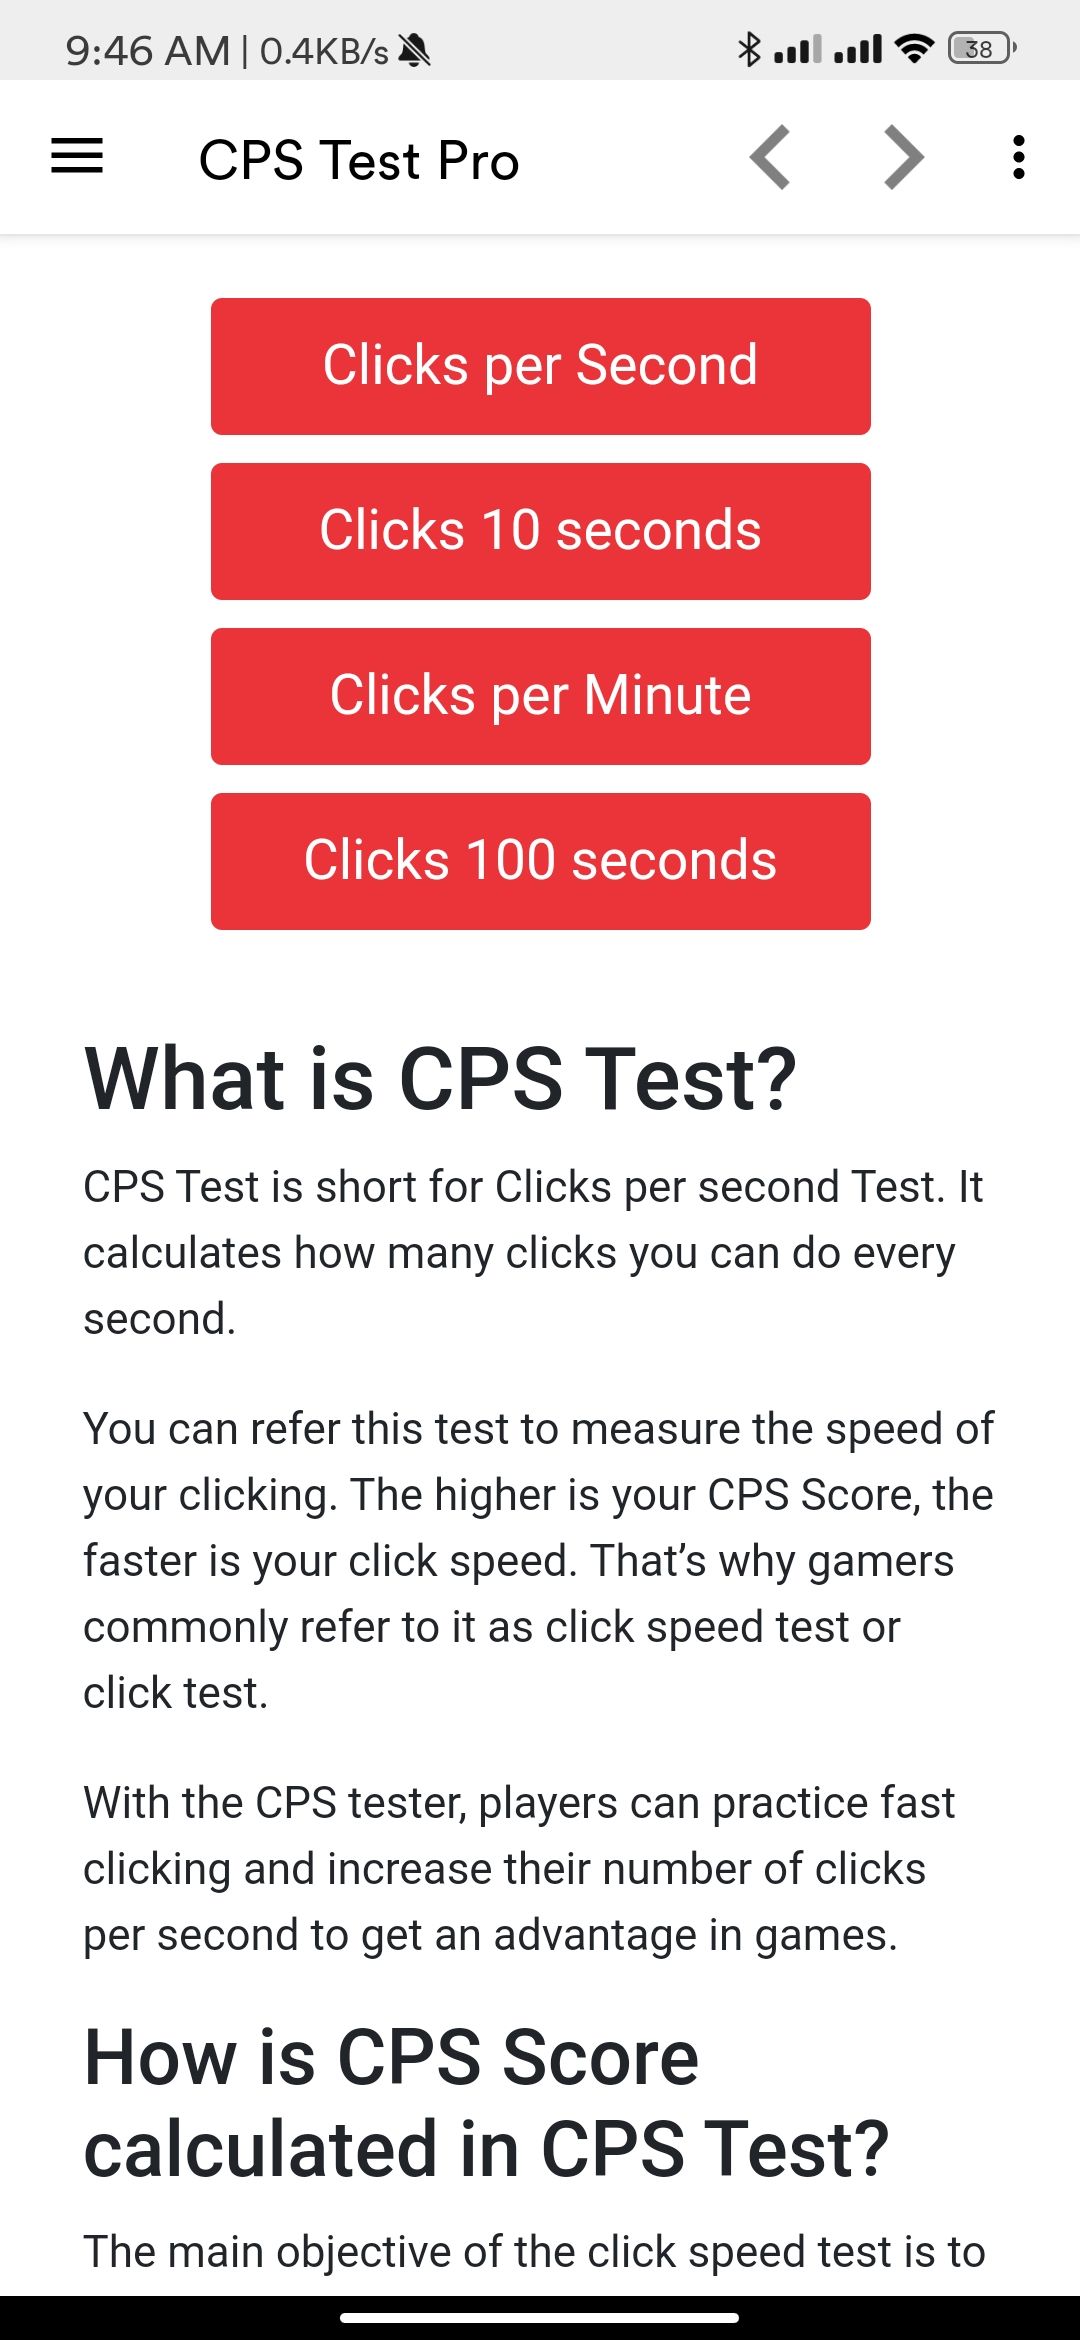 What is the best CPS Test to improve clicking? - Quora